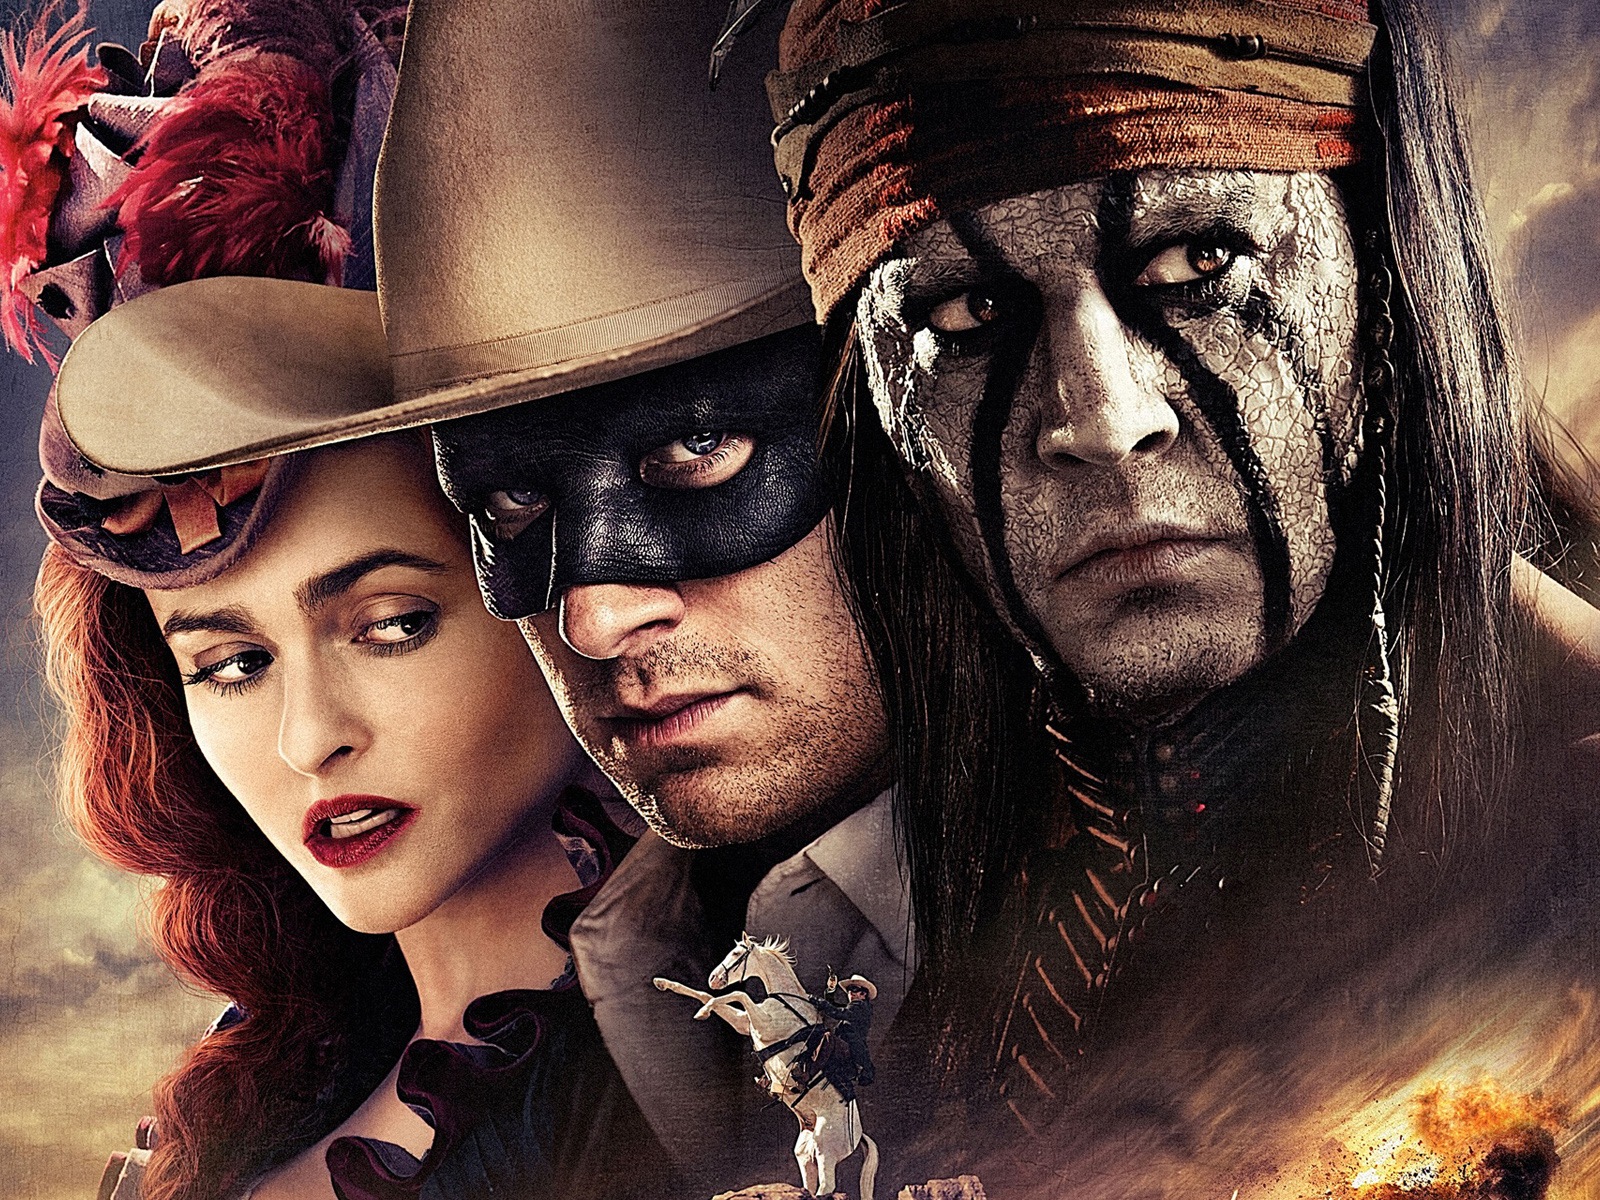 The Lone Ranger HD movie wallpapers #1 - 1600x1200